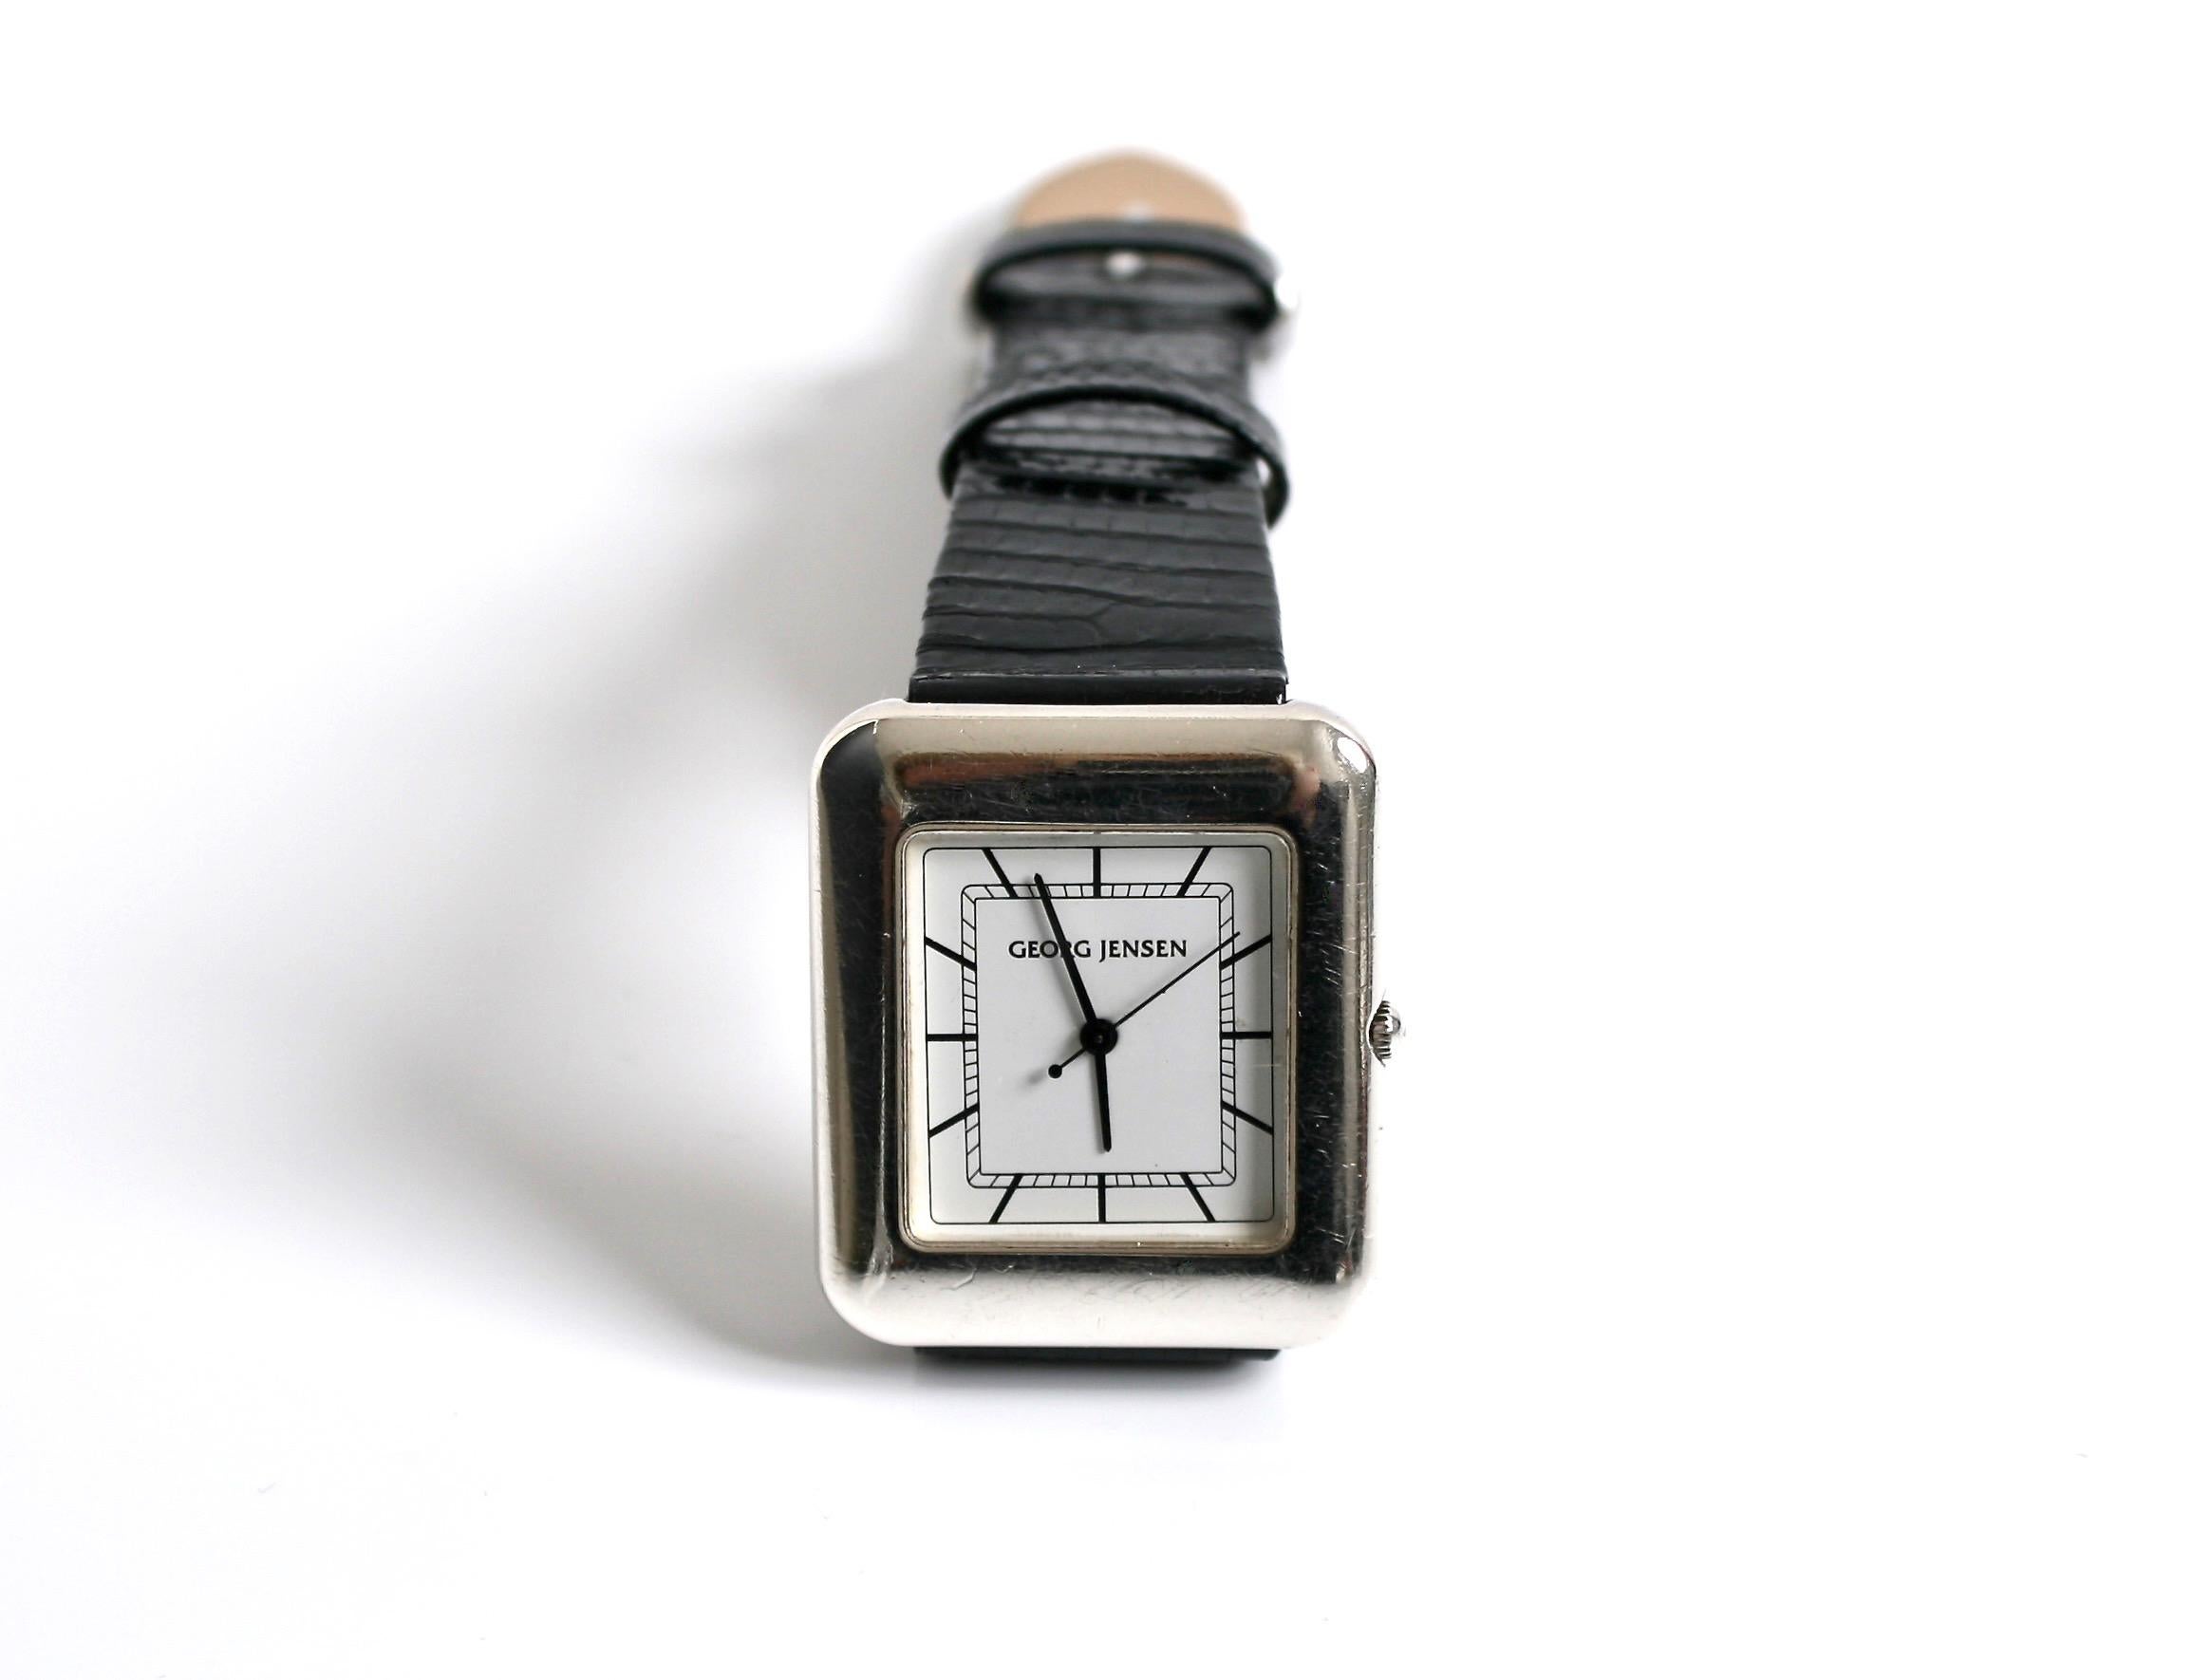 Rare Georg Jensen Sterling silver quartz Watch Designed by Lene Munth Denmark c1980
Crisp white face with with black hands, numbers & second hand
Original Hirch Lizard black strap with sterling silver buckle with Georg Jensen logo
Swiss made water